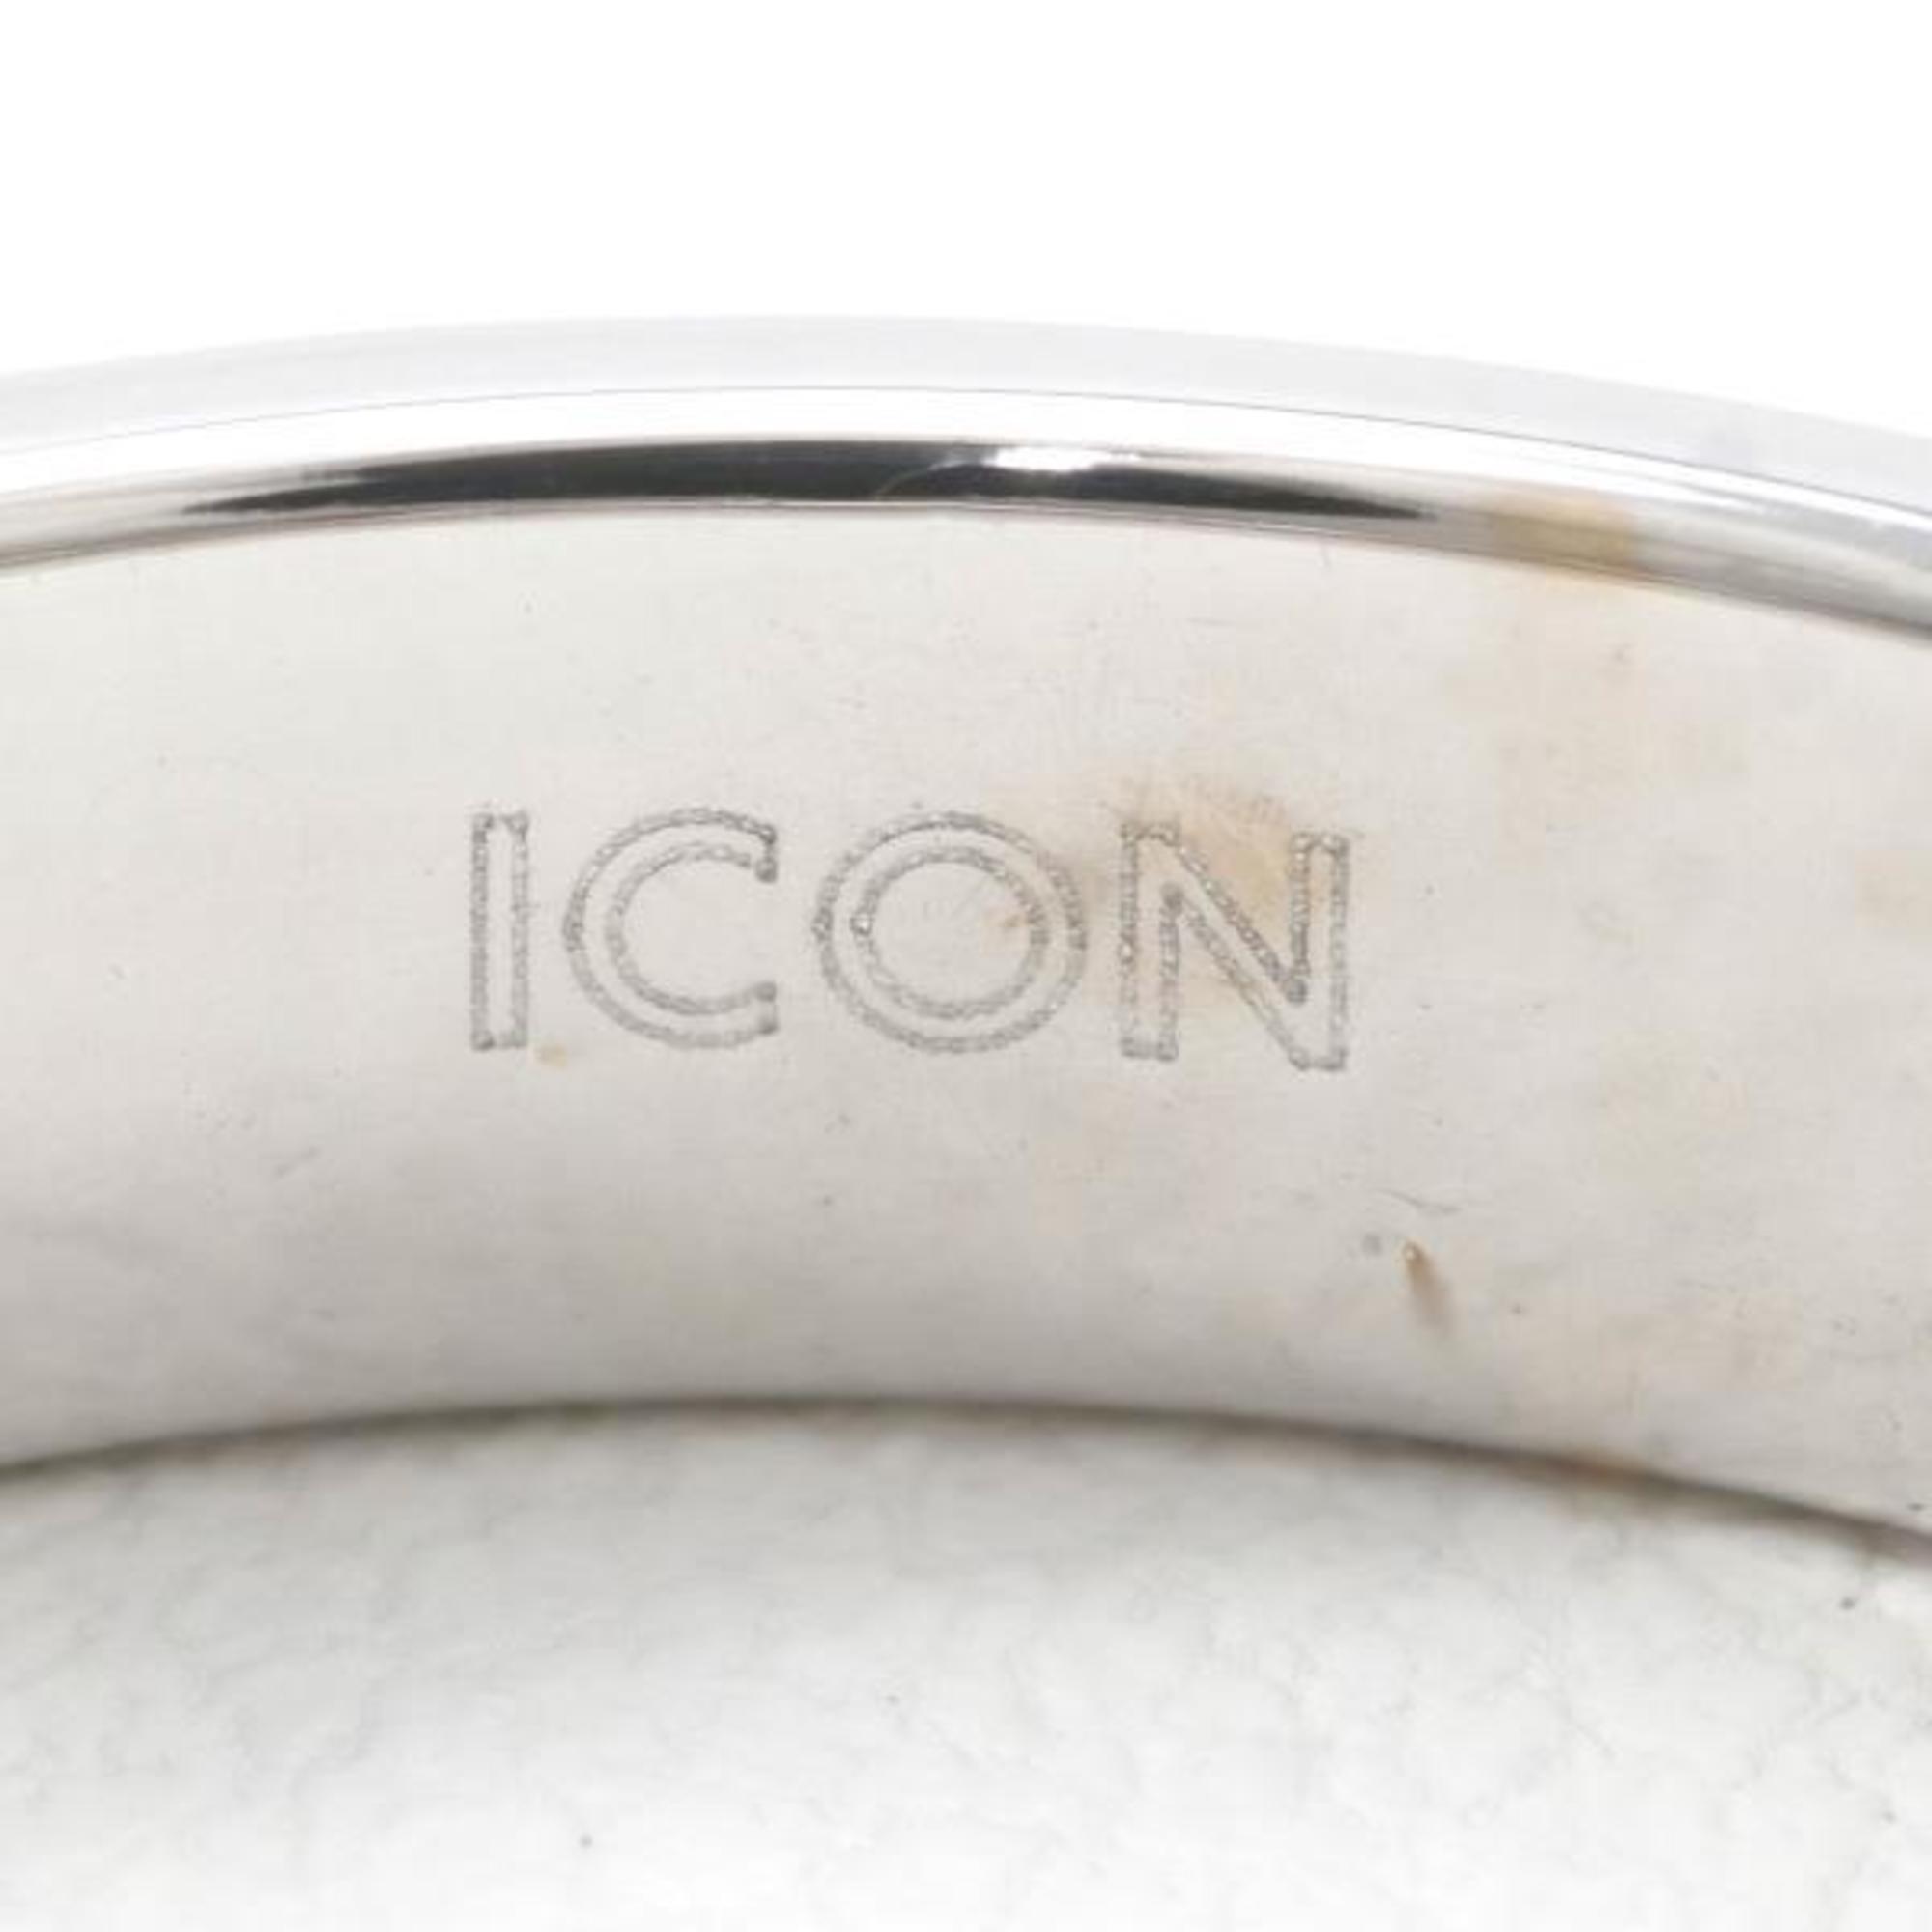 Gucci Icon K18WG Ring Size 11.5 Total Weight Approx. 3.4g Jewelry